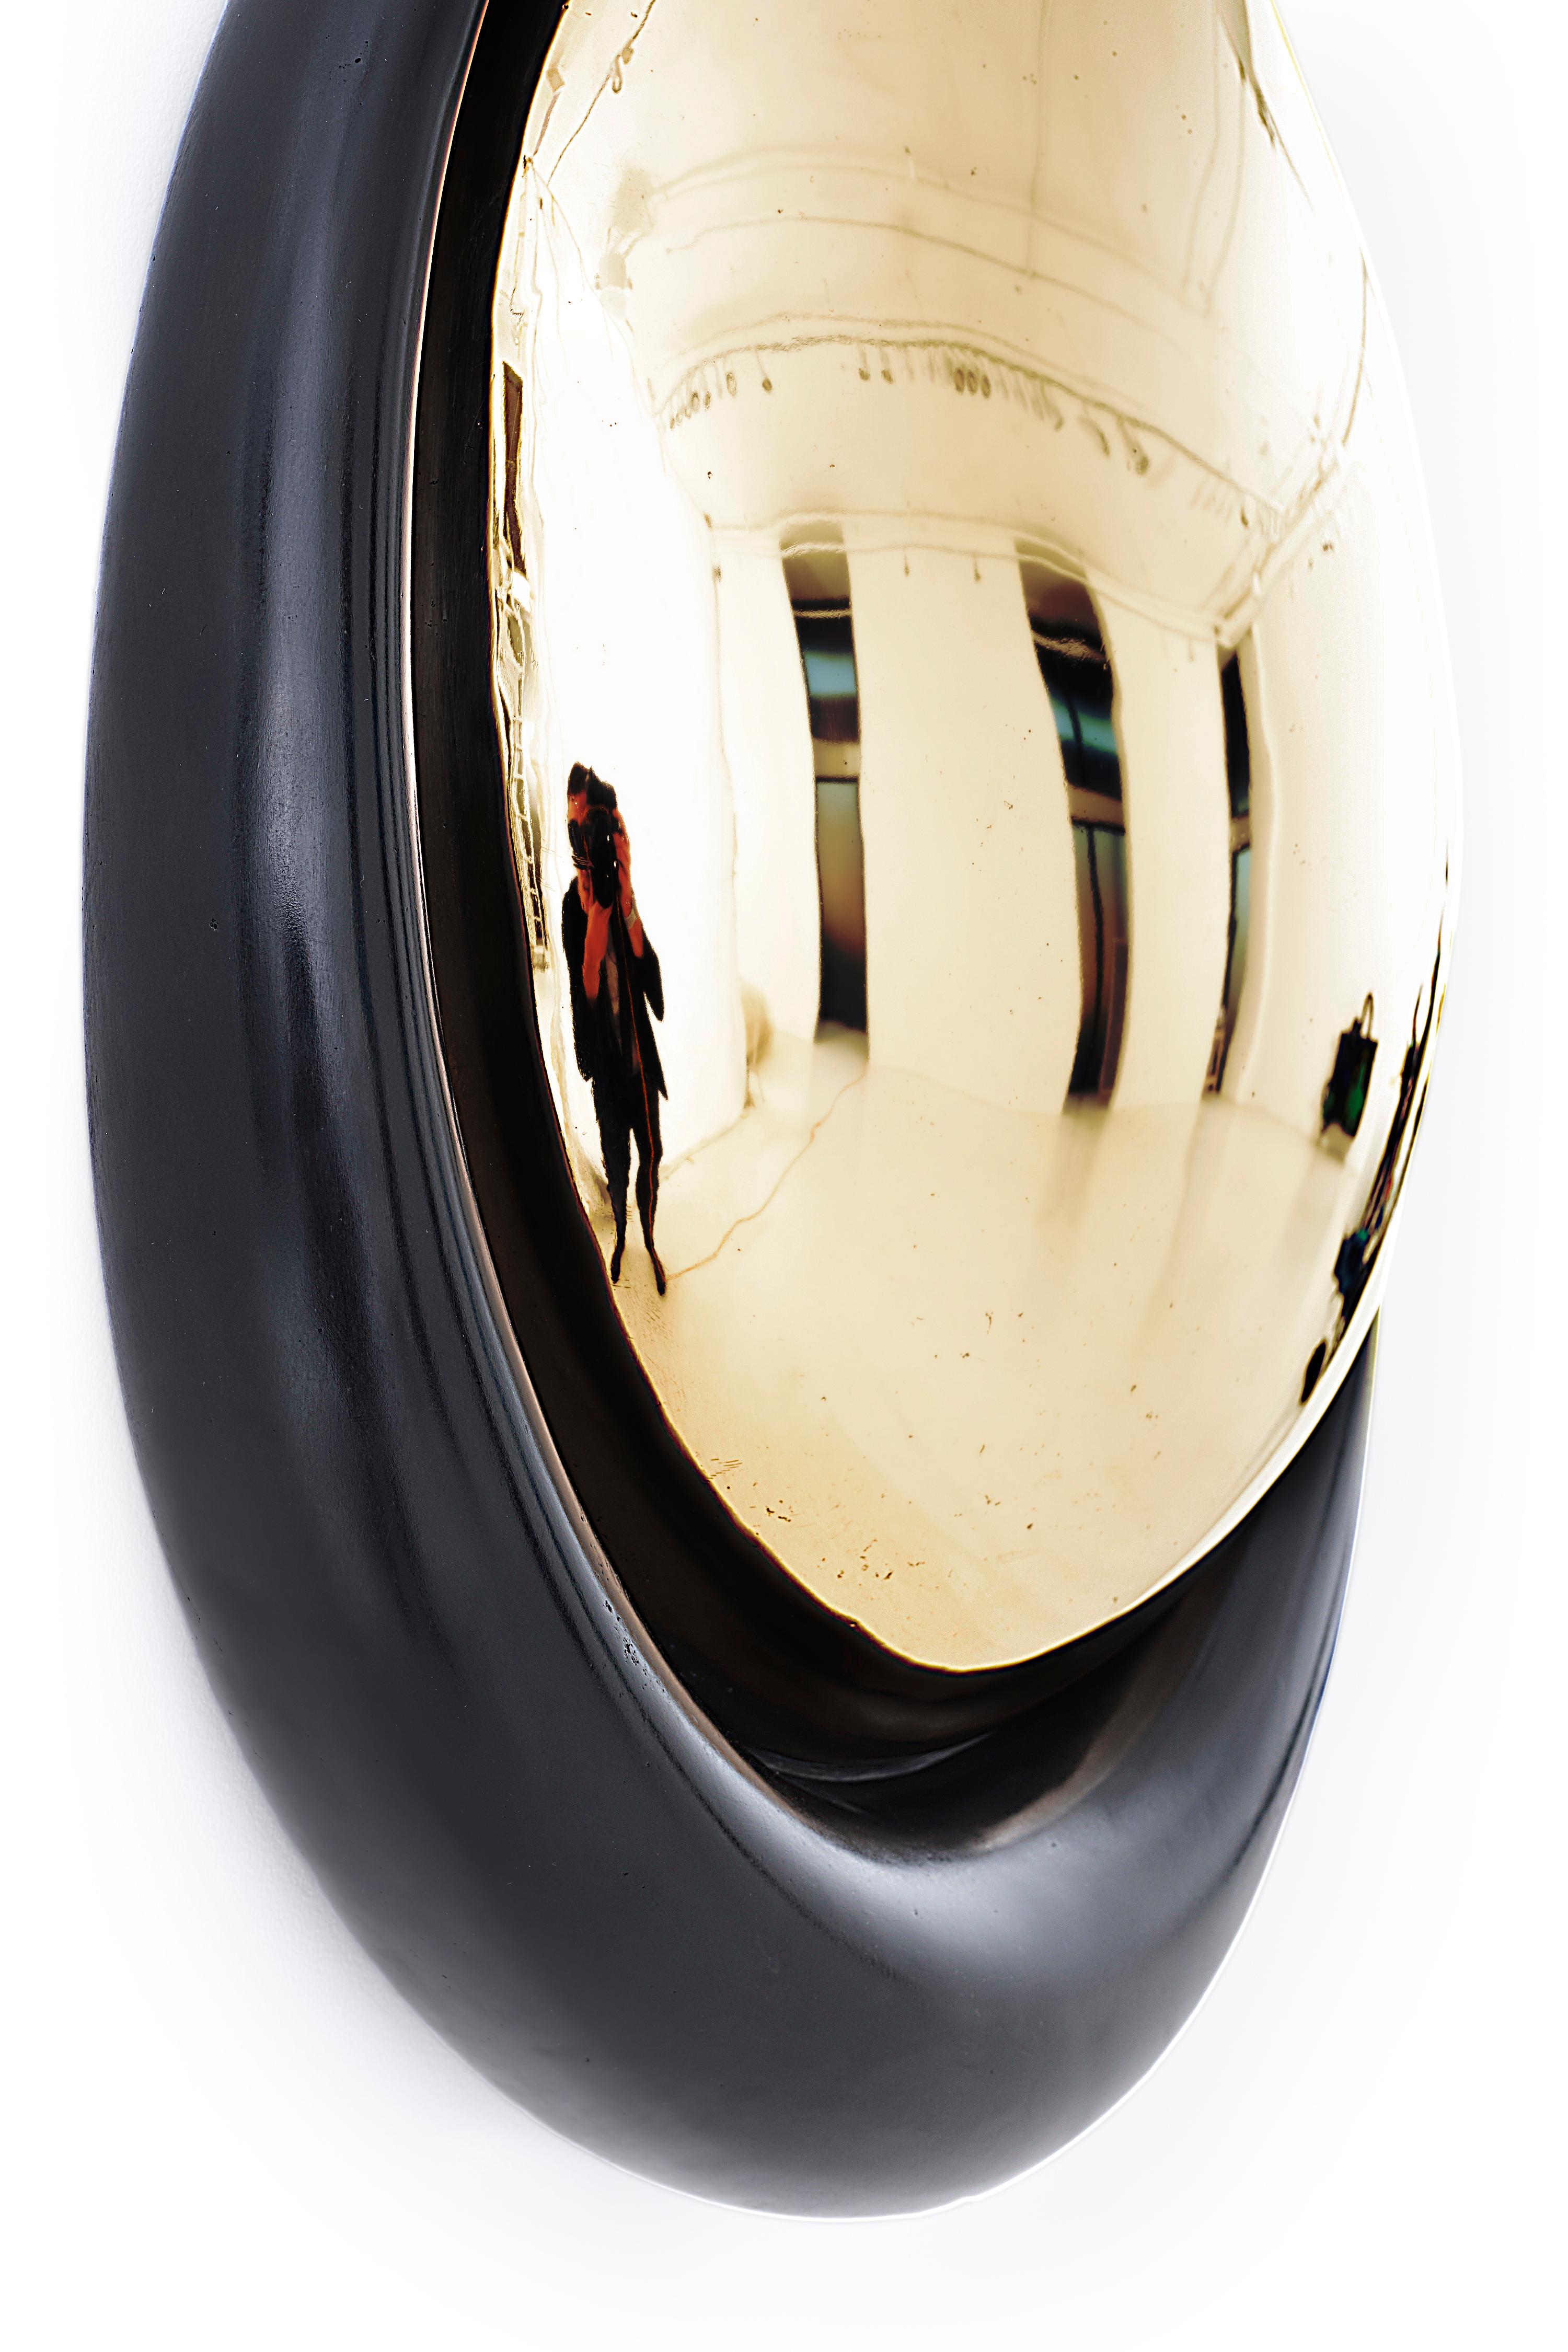 Rivoningo (To Reflect) is a wall sculpture that exploits the qualities of bronze to create an amorphic convex mirror. The bulbous and highly polished interior section offers a triple reflection. “This piece distorts your perception of self and